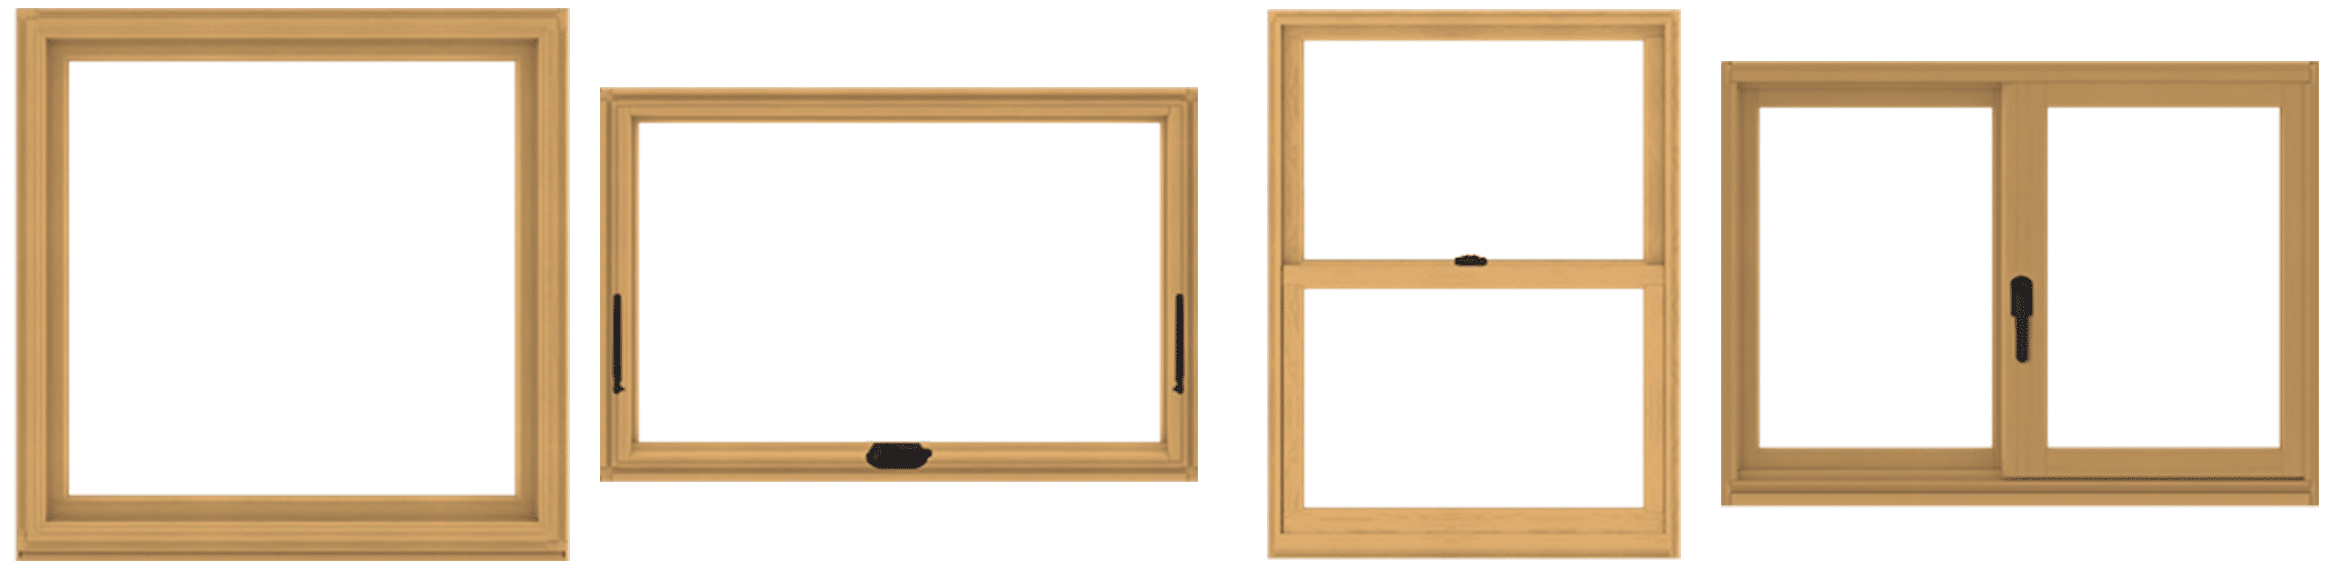 Window Types | Casement, Double Hung and More